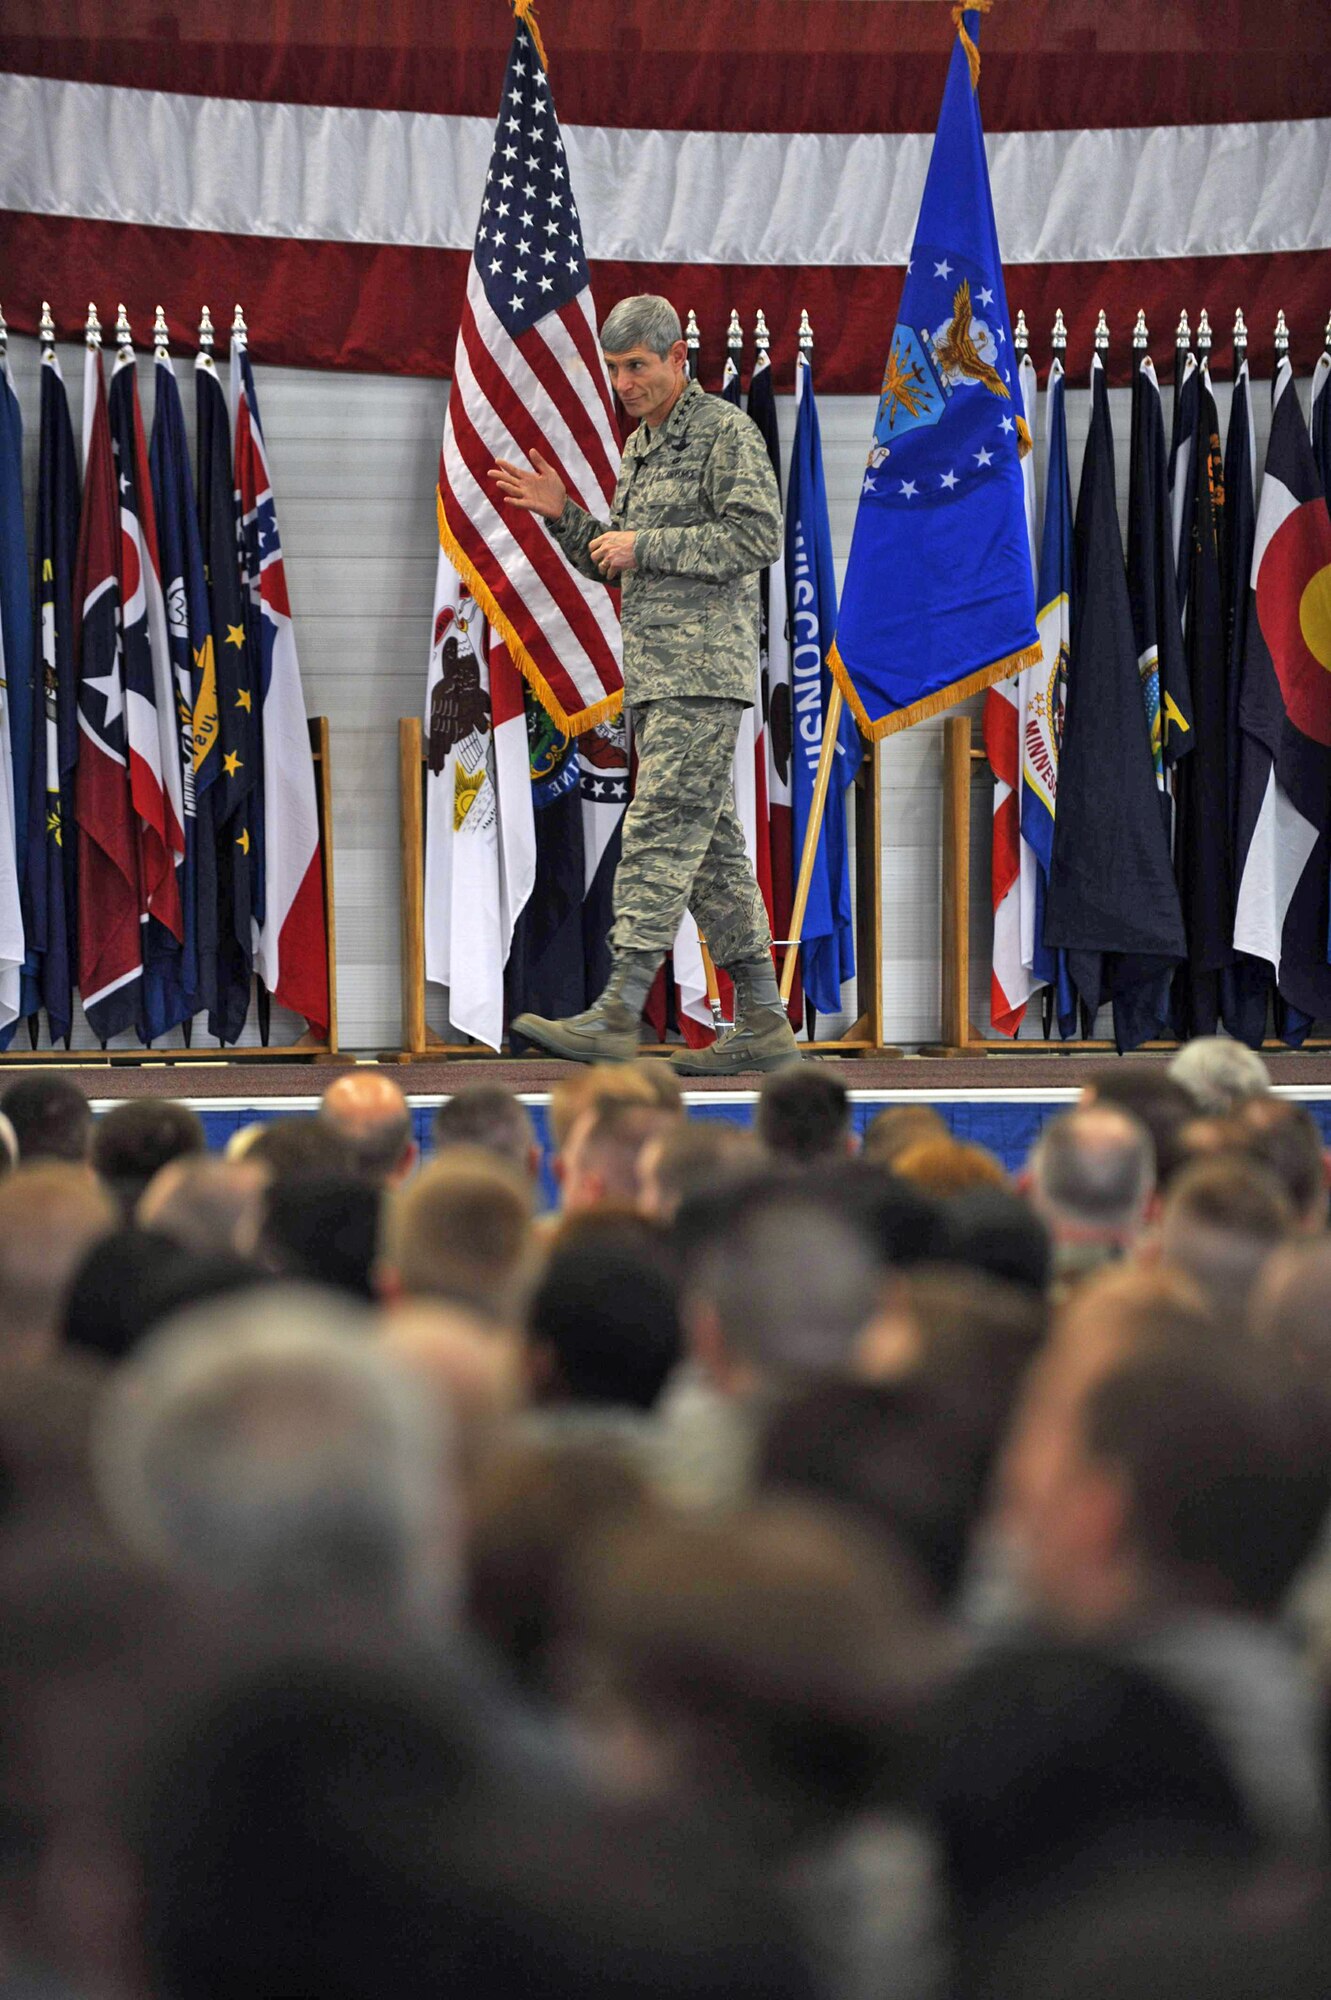 Gen. Norton Schwartz addresses more than 1,500 Airmen on teamwork and excellence April 1, 2010, at Minot Air Force Base N.D. (U.S. Air Force photo)
